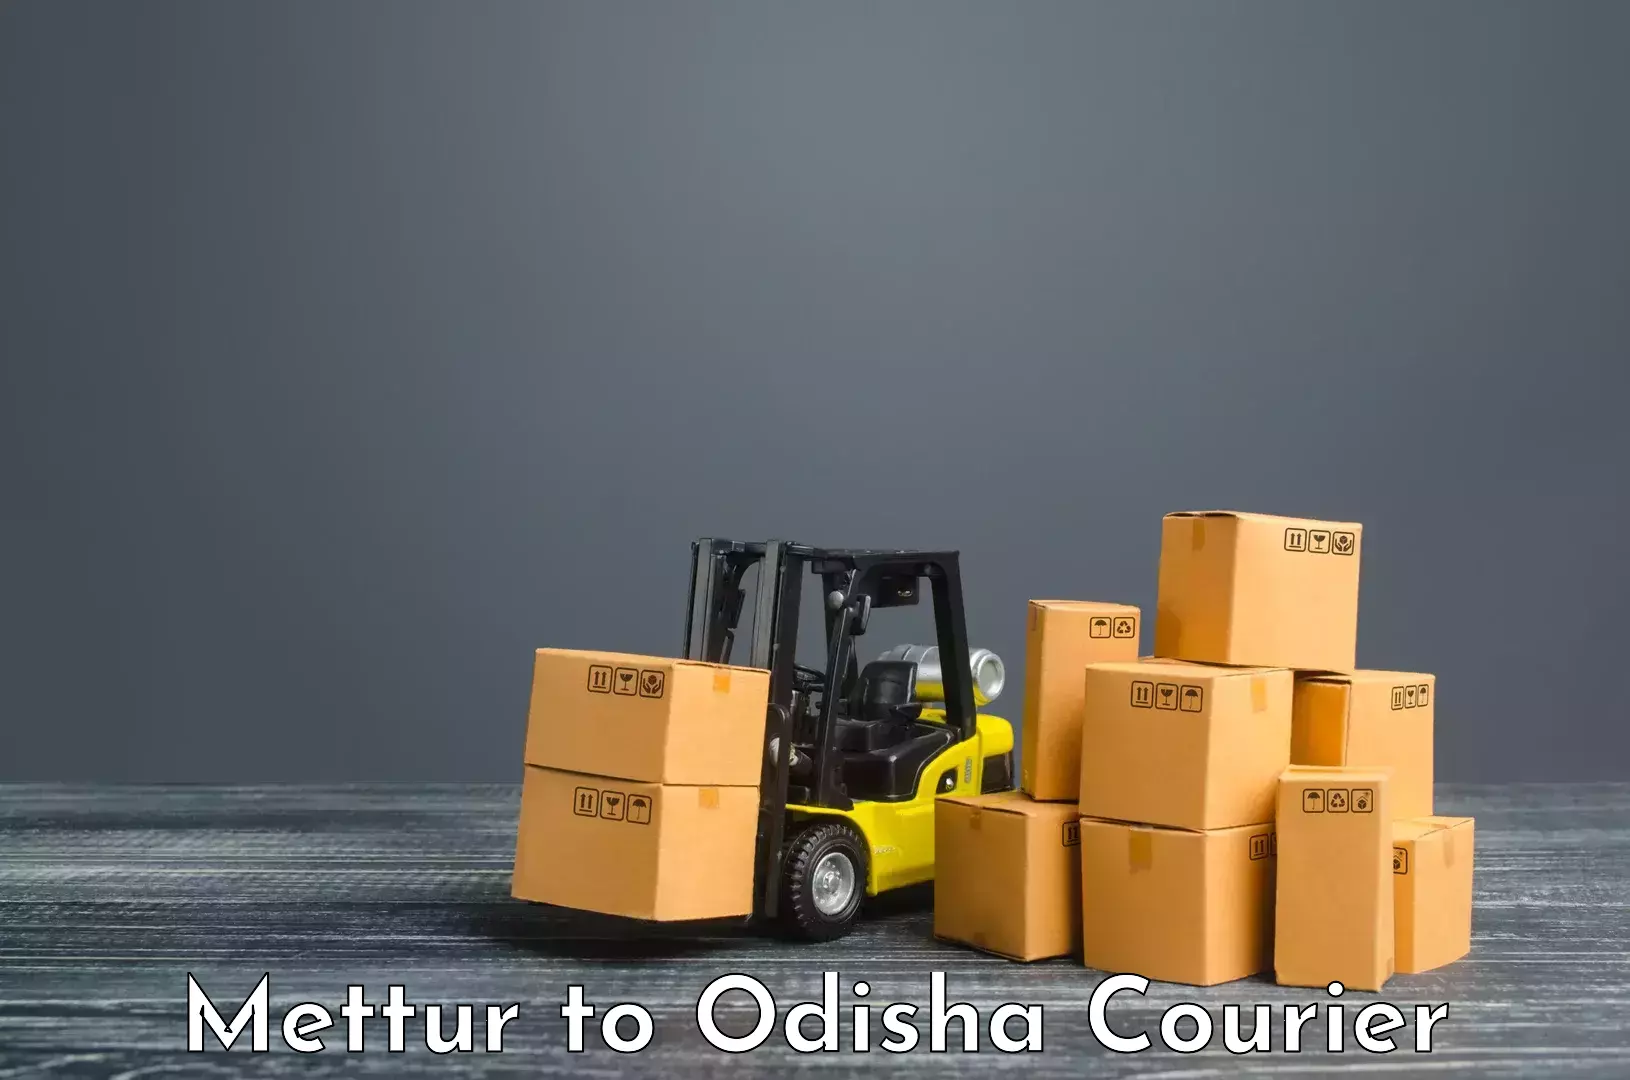 Subscription-based courier Mettur to Gajapati